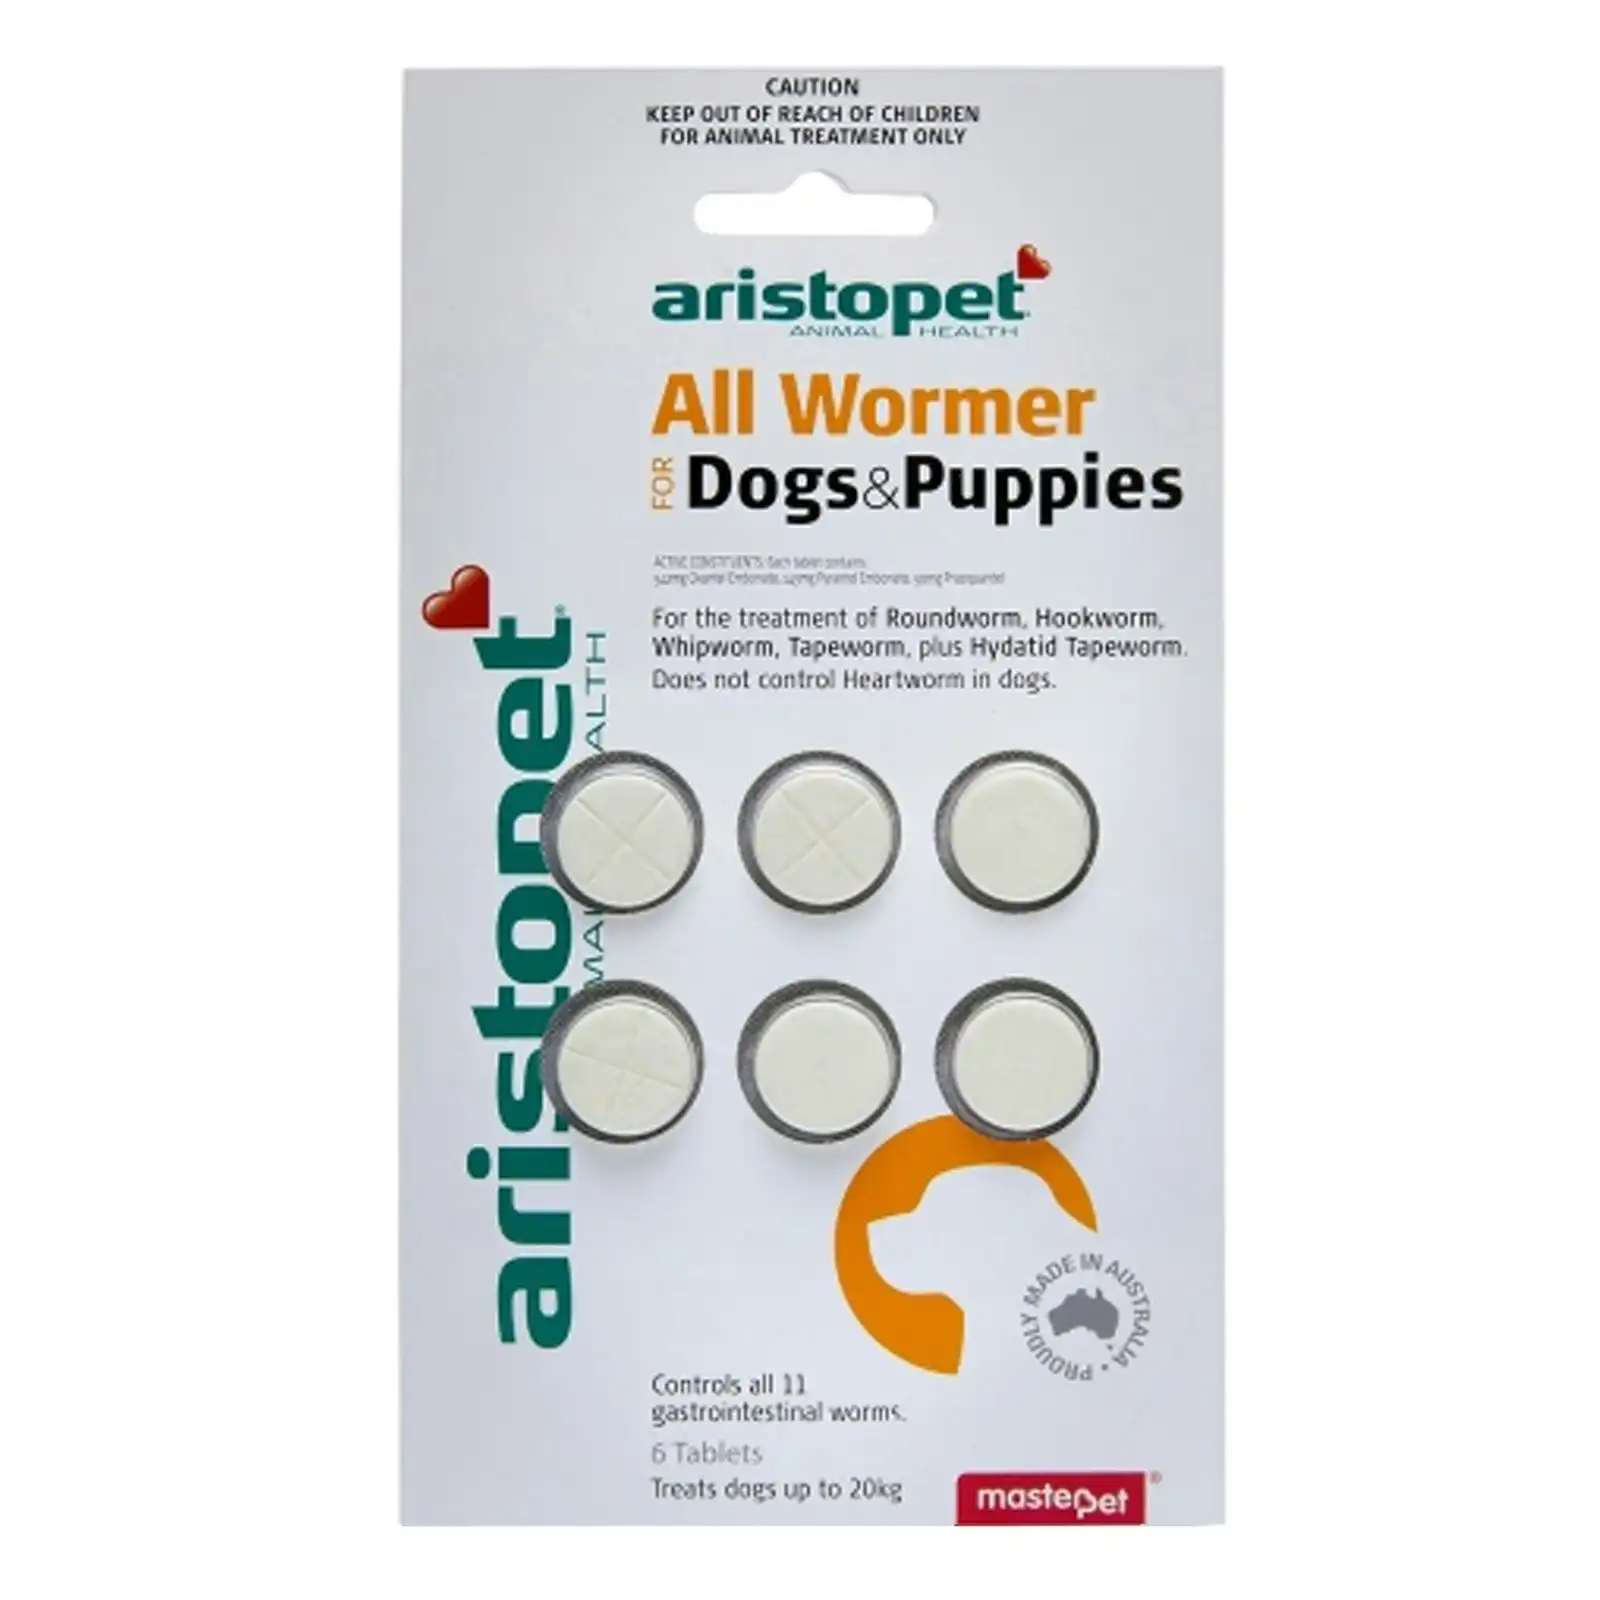 Aristopet Allwormer For Dogs and Puppies 10 Kg 4 Tablets